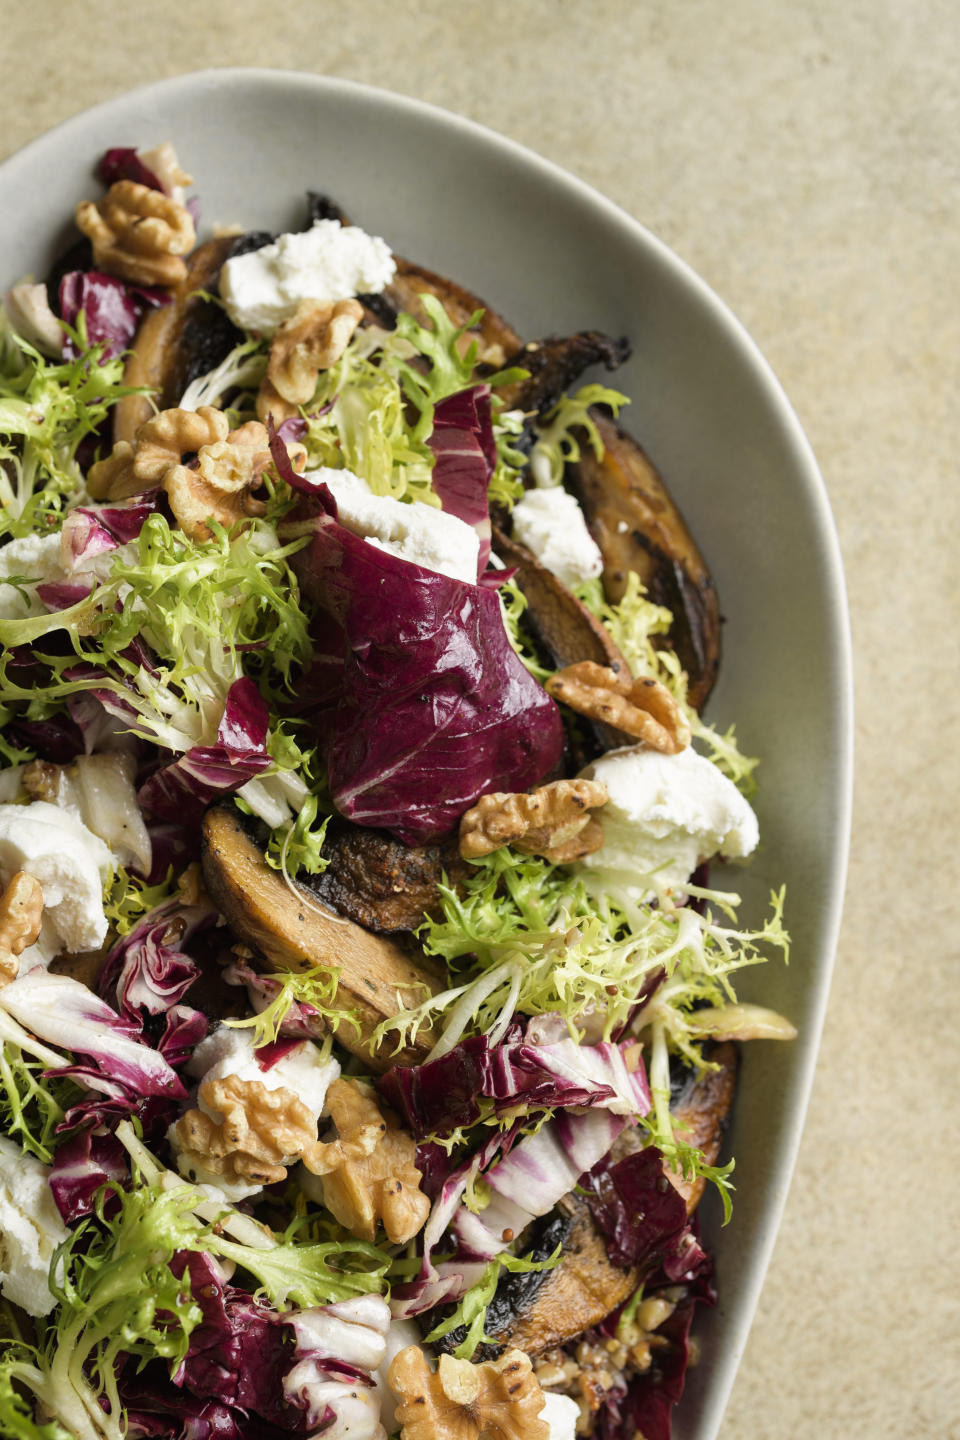 This image released by Milk Street shows a recipe for frisée and mushroom salad with goat cheese and walnuts. (Milk Street via AP)